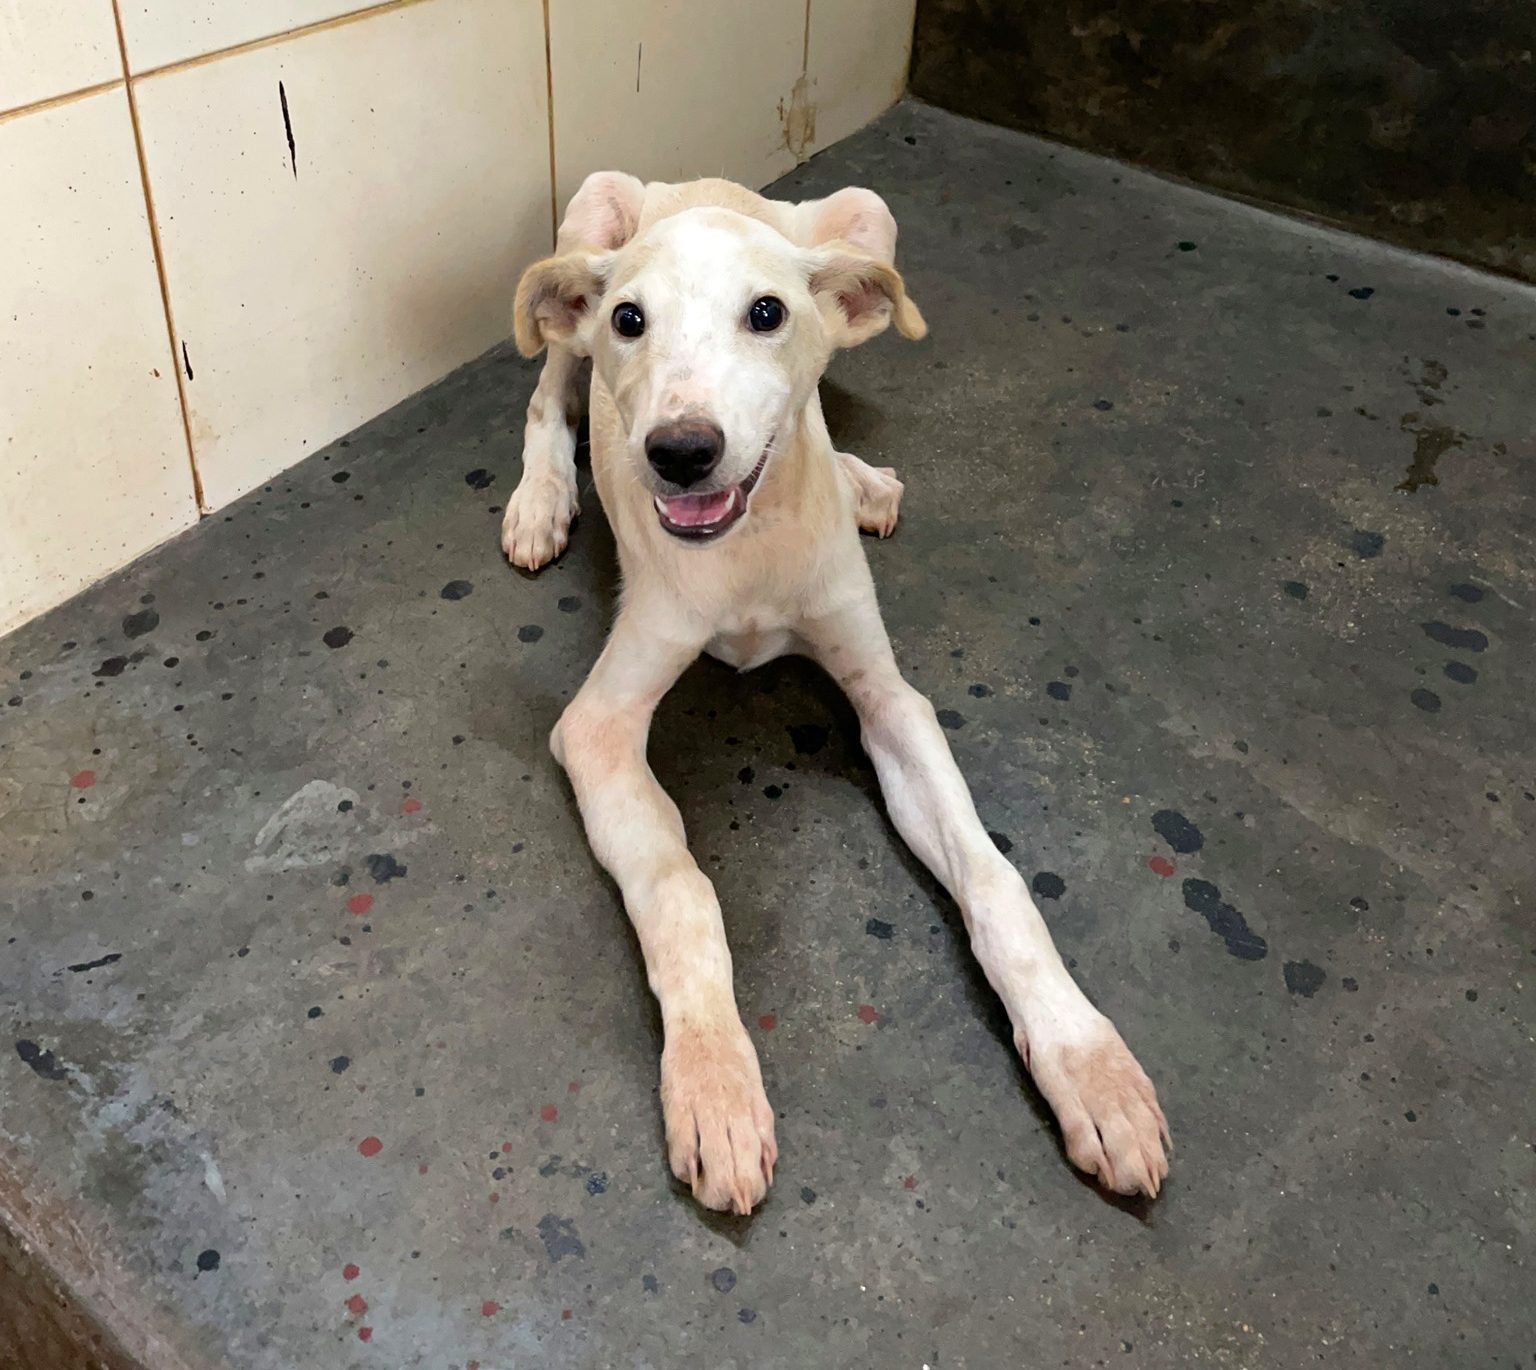 India: Puppy attacked with metal rod